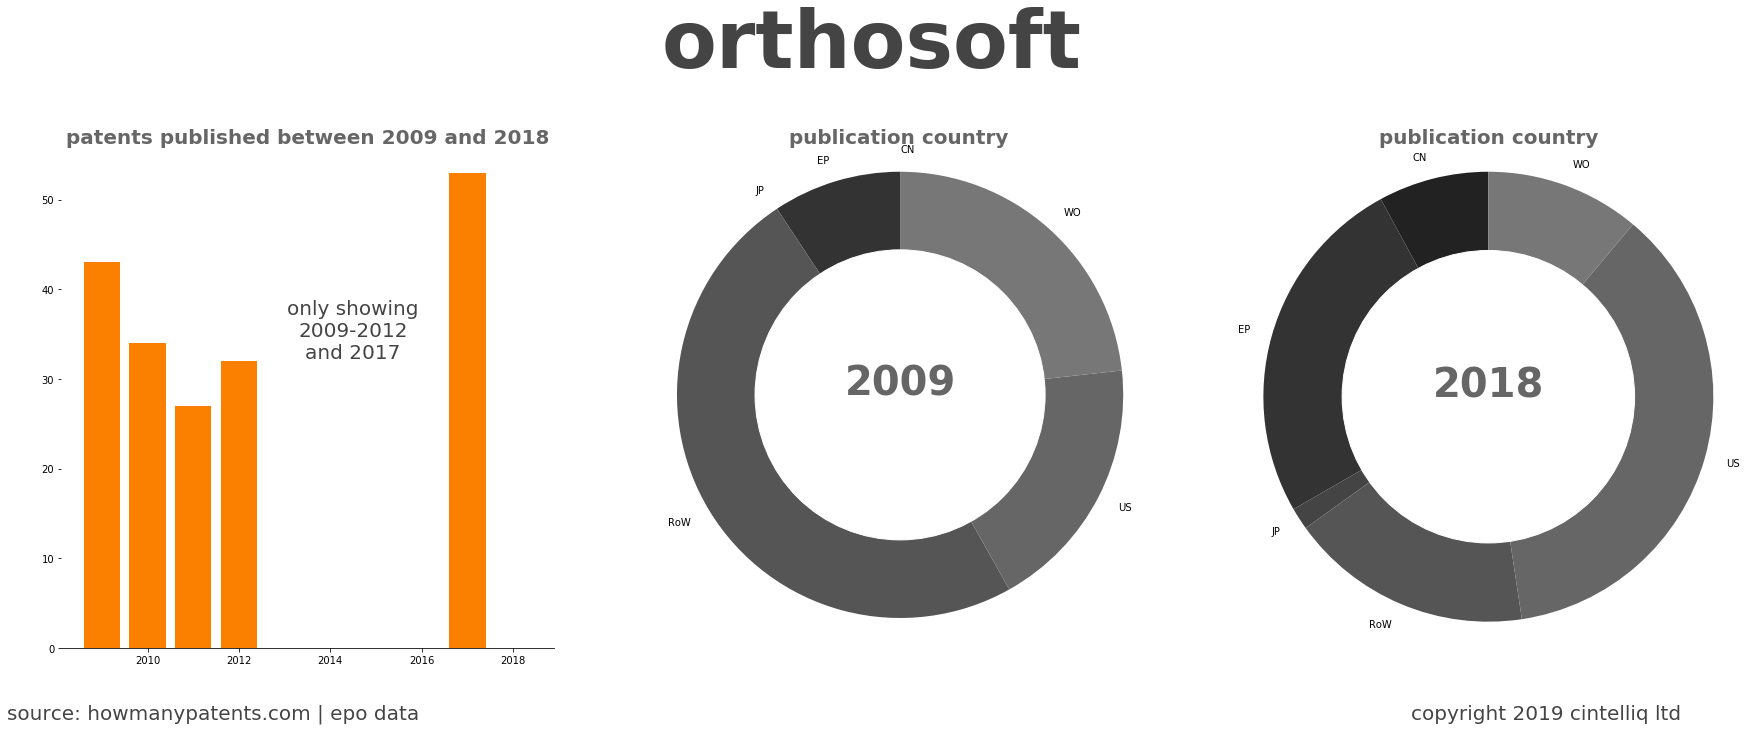 summary of patents for Orthosoft